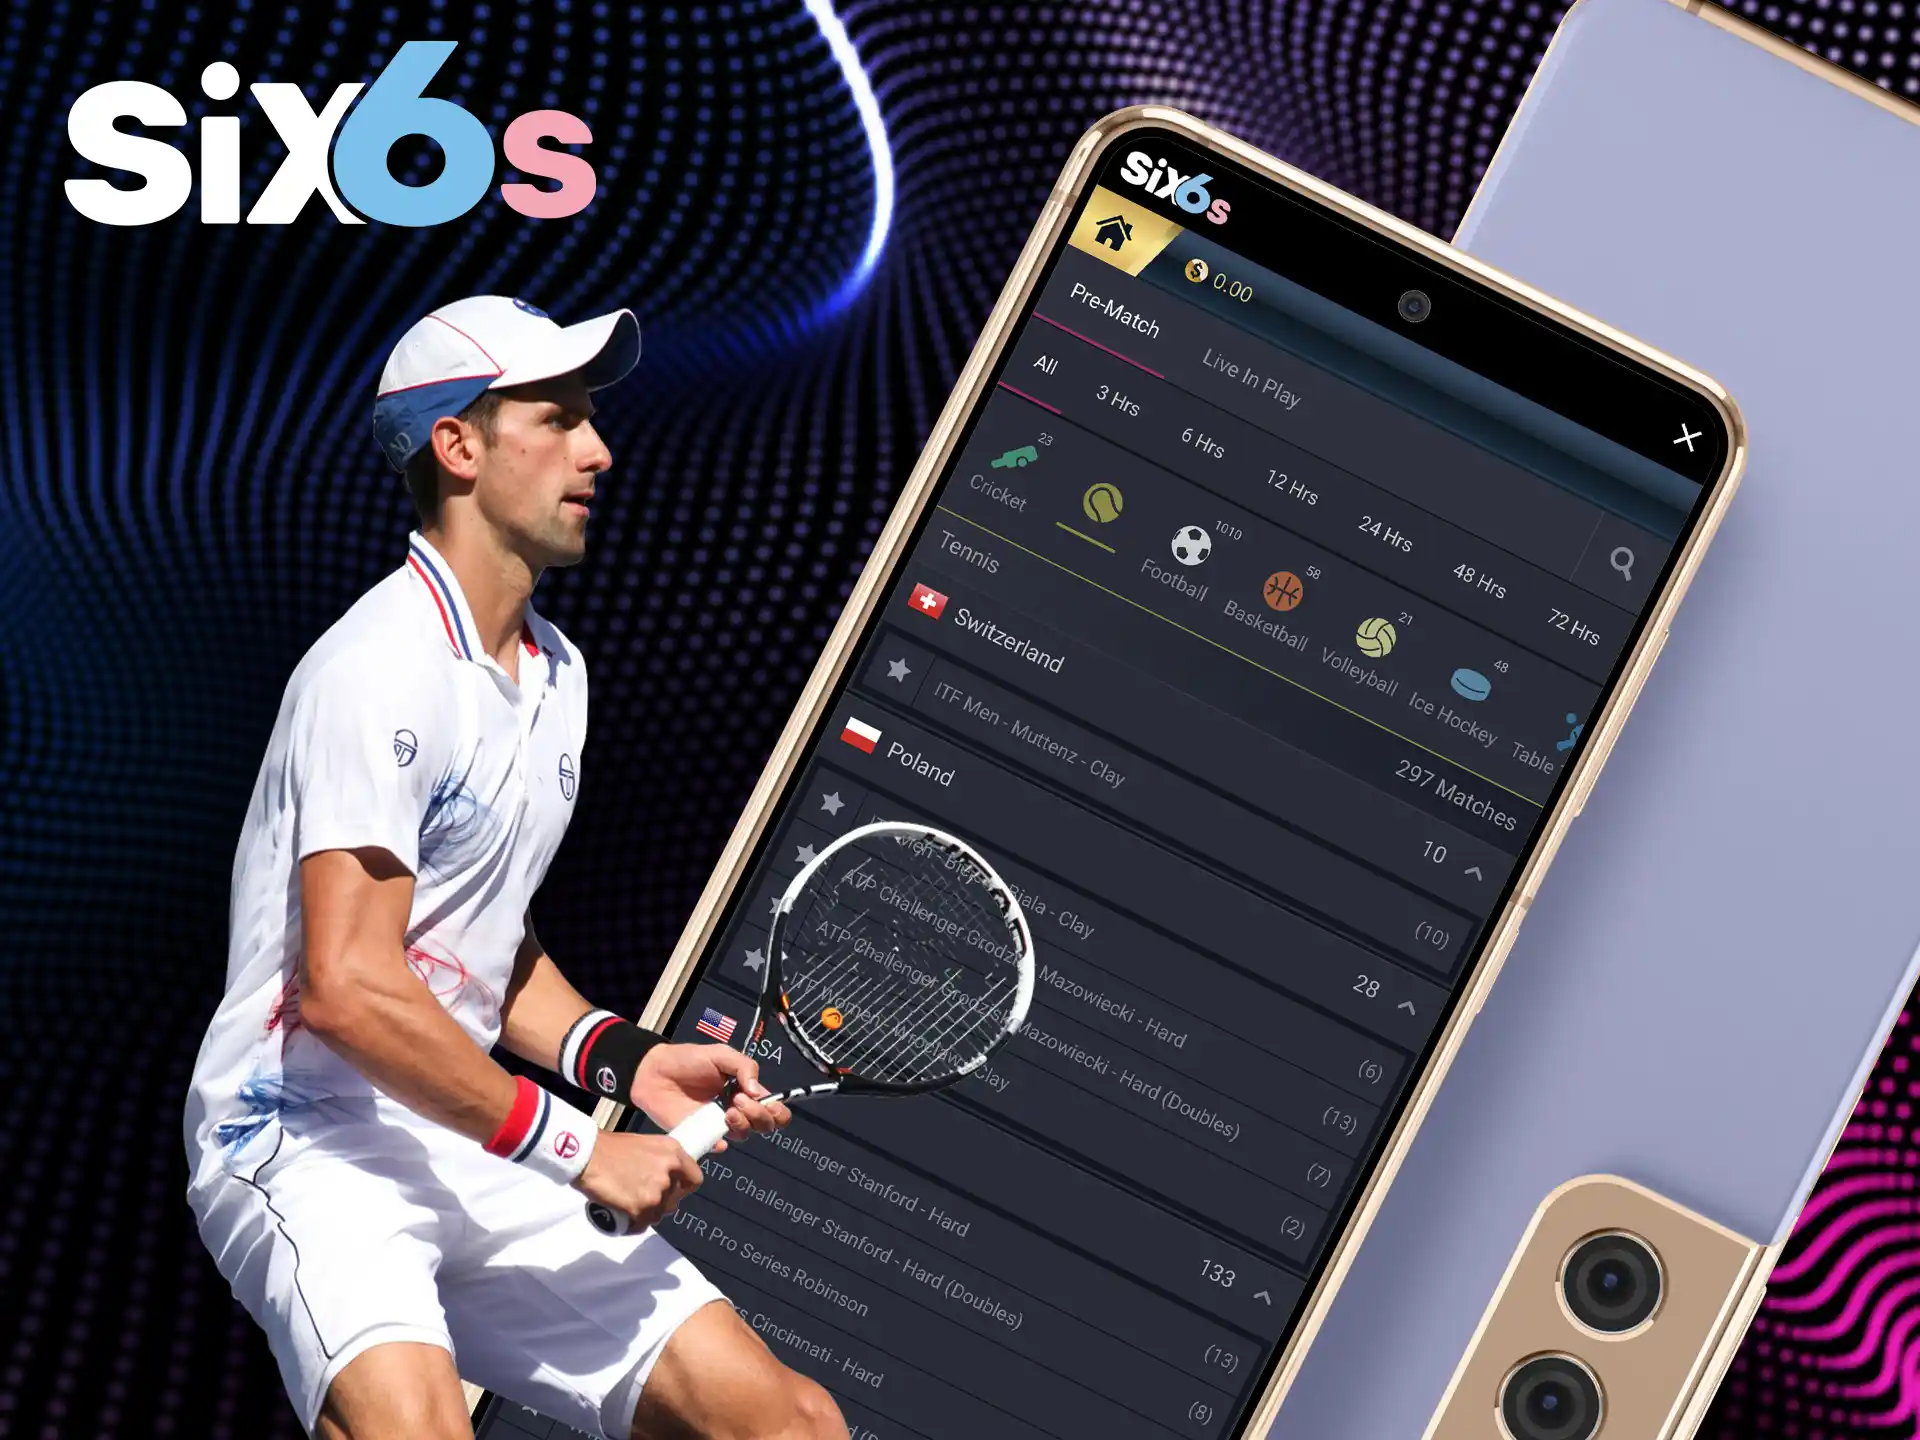 Tennis is the most popular sport for betting on the Six6s app.